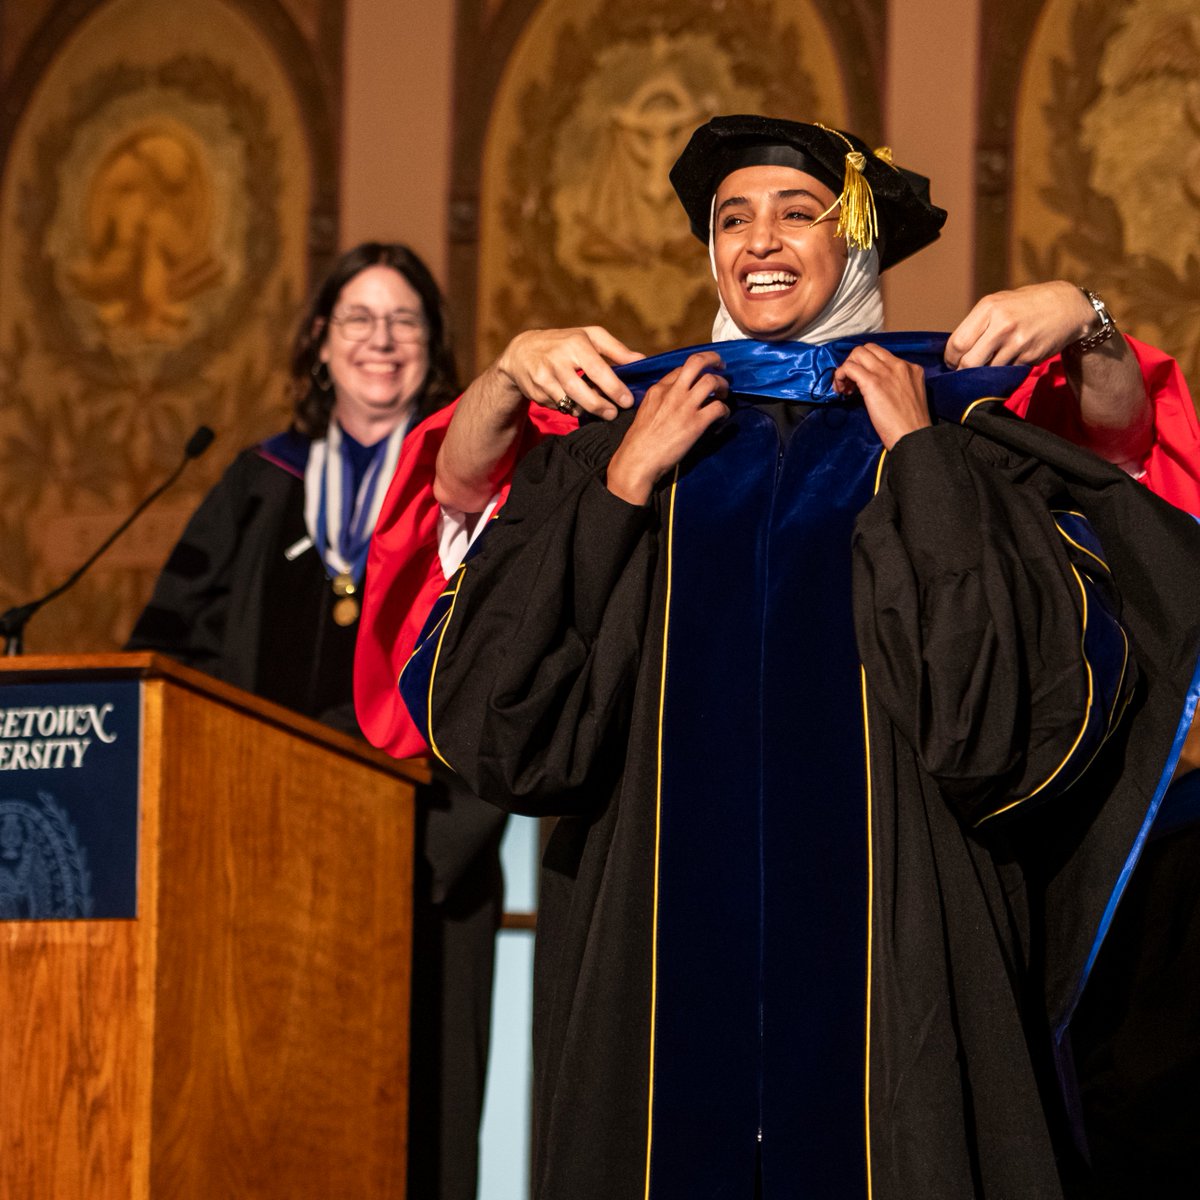 ICYMI: We had a rocking Multicultural Ceremony for #GradHoyas yesterday and an inspiring Doctoral Hooding Ceremony this morning. We can't wait for tomorrow's Commencement! #Hoyas2024 #GeorgetownUniversity #GradHoyas #GraduateSchool #HigherEd – @Georgetown @GeorgetownBGE